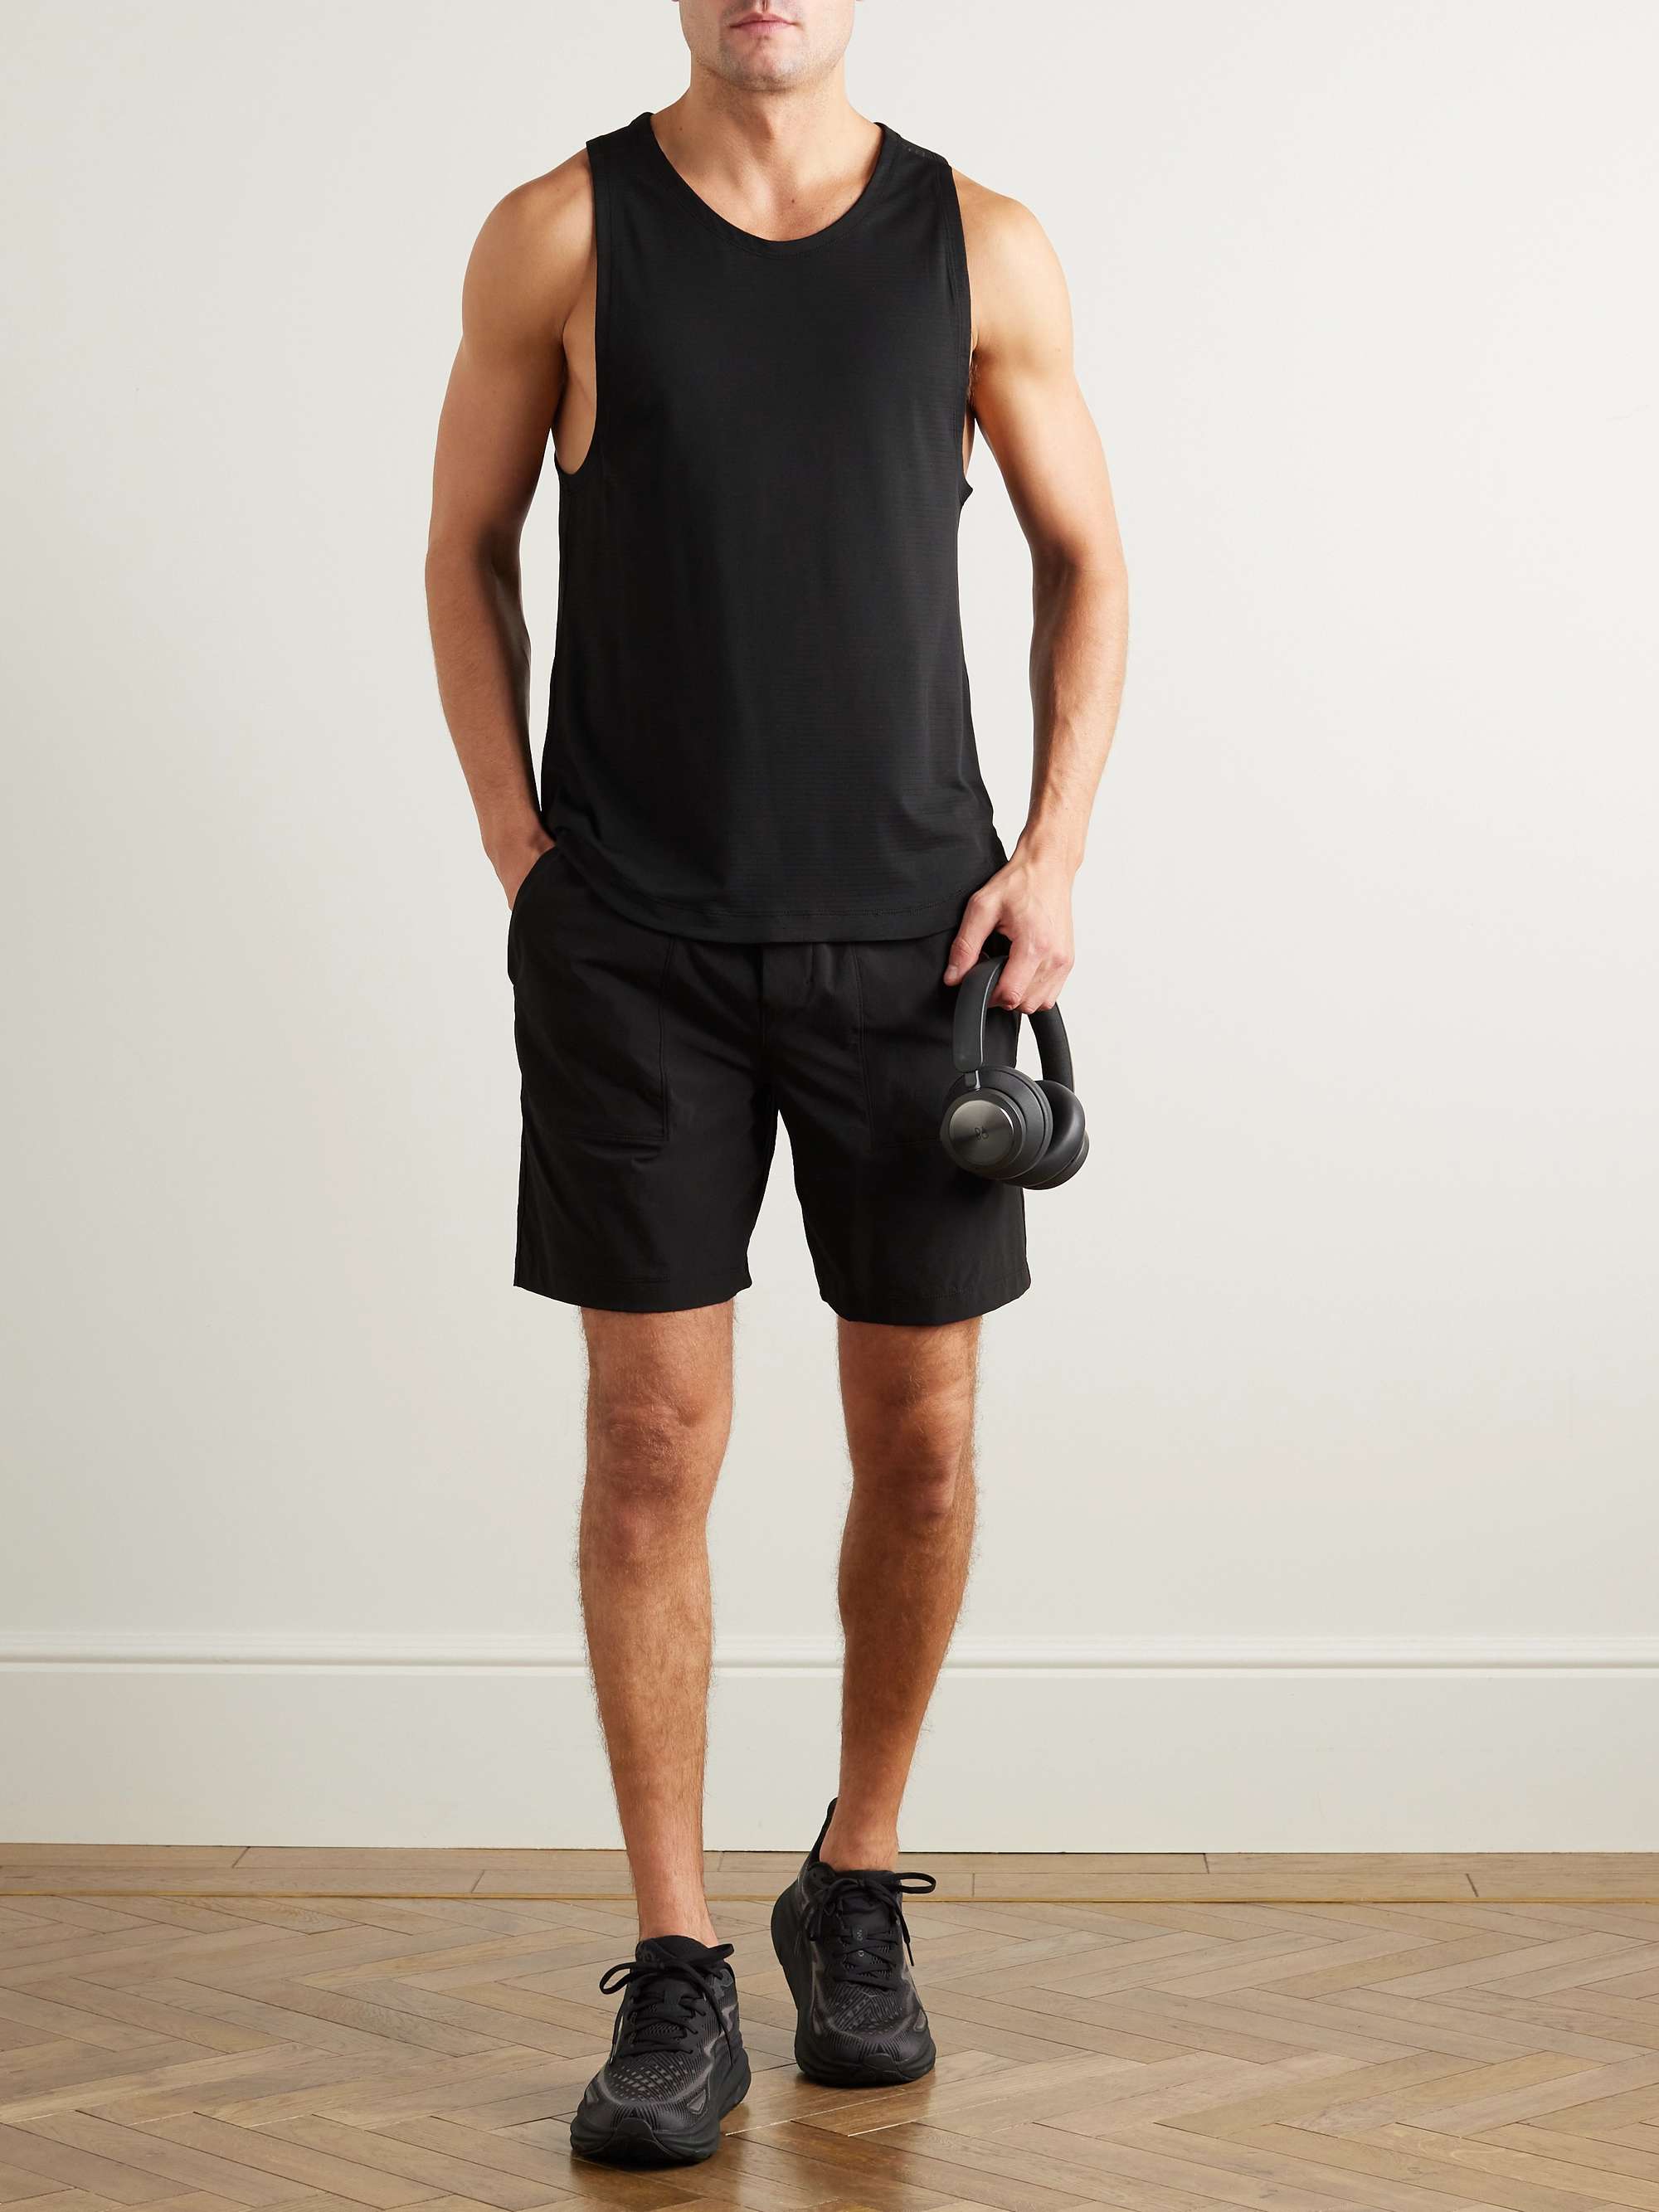 LULULEMON License to Train Recycled-Mesh Tank Top for Men